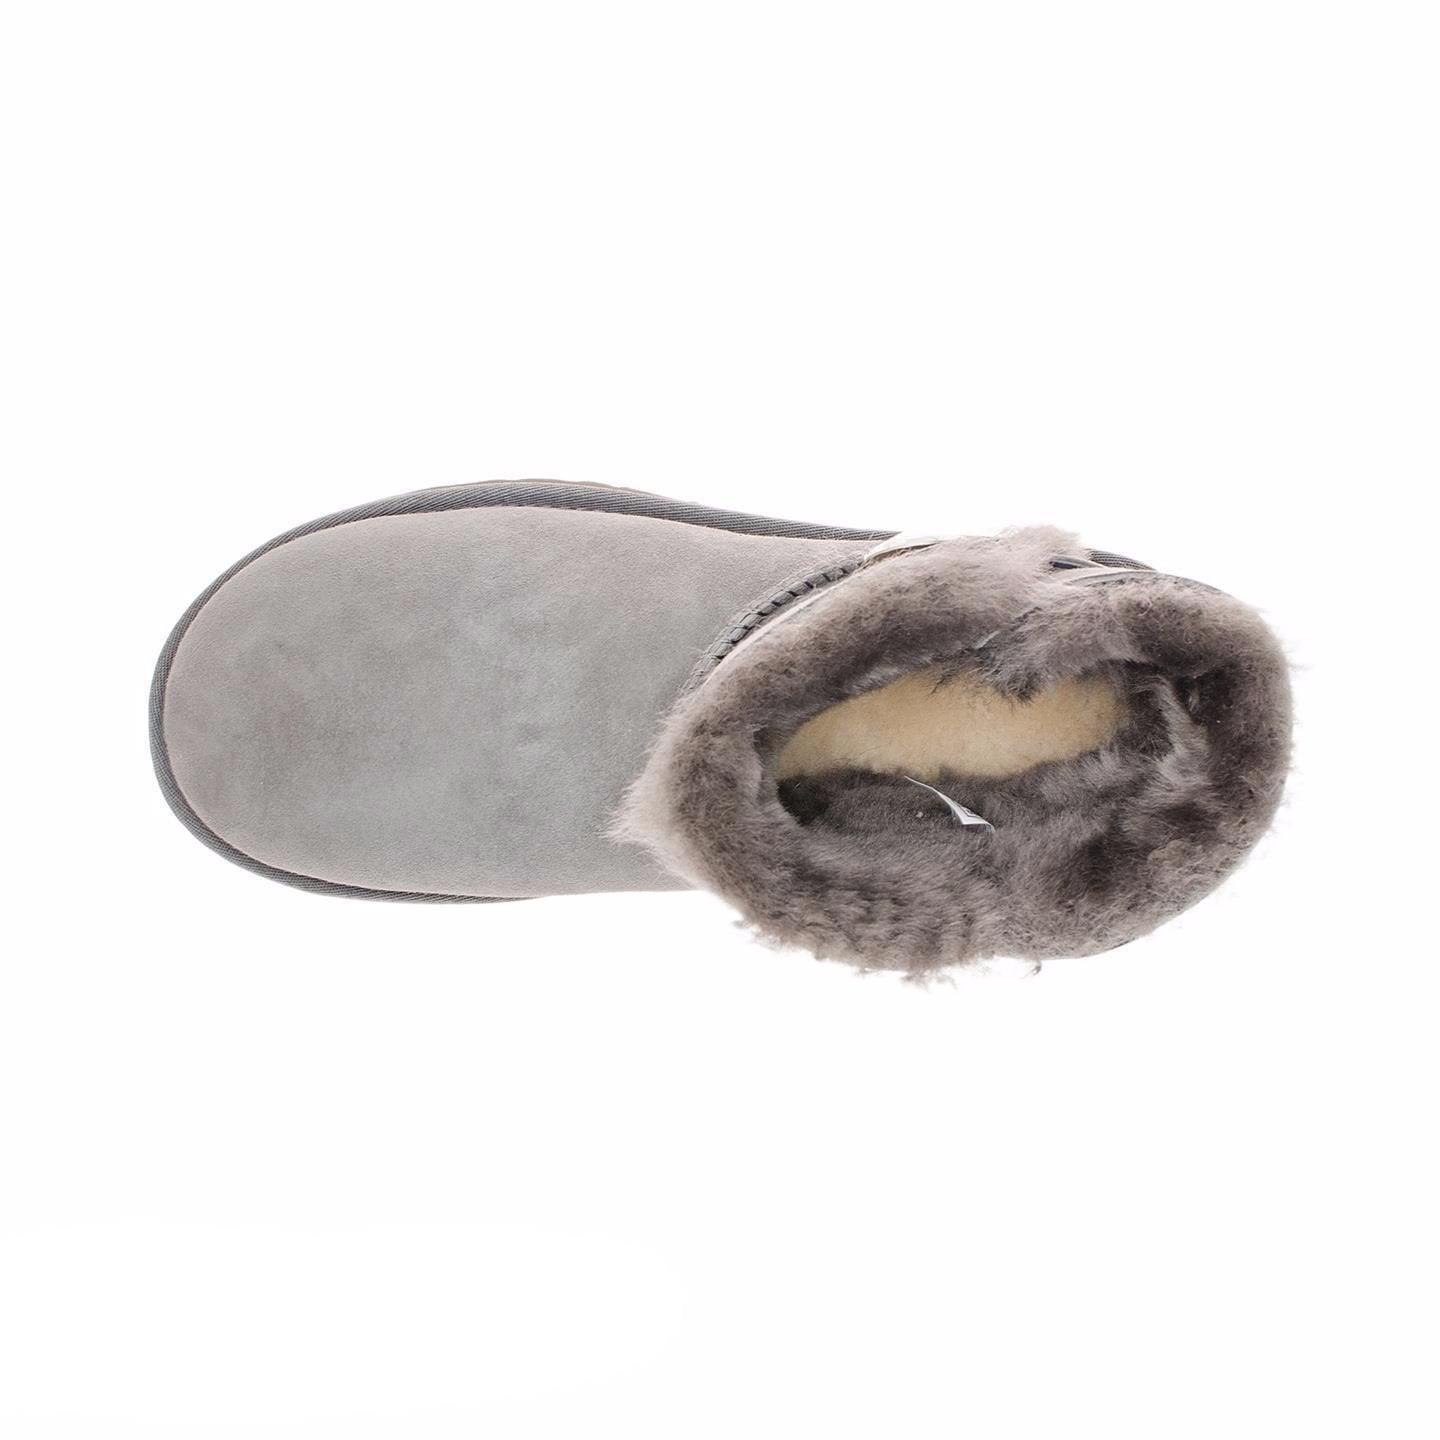 UGG Mini Bailey Button Bling Grey Boots – MyCozyBoots